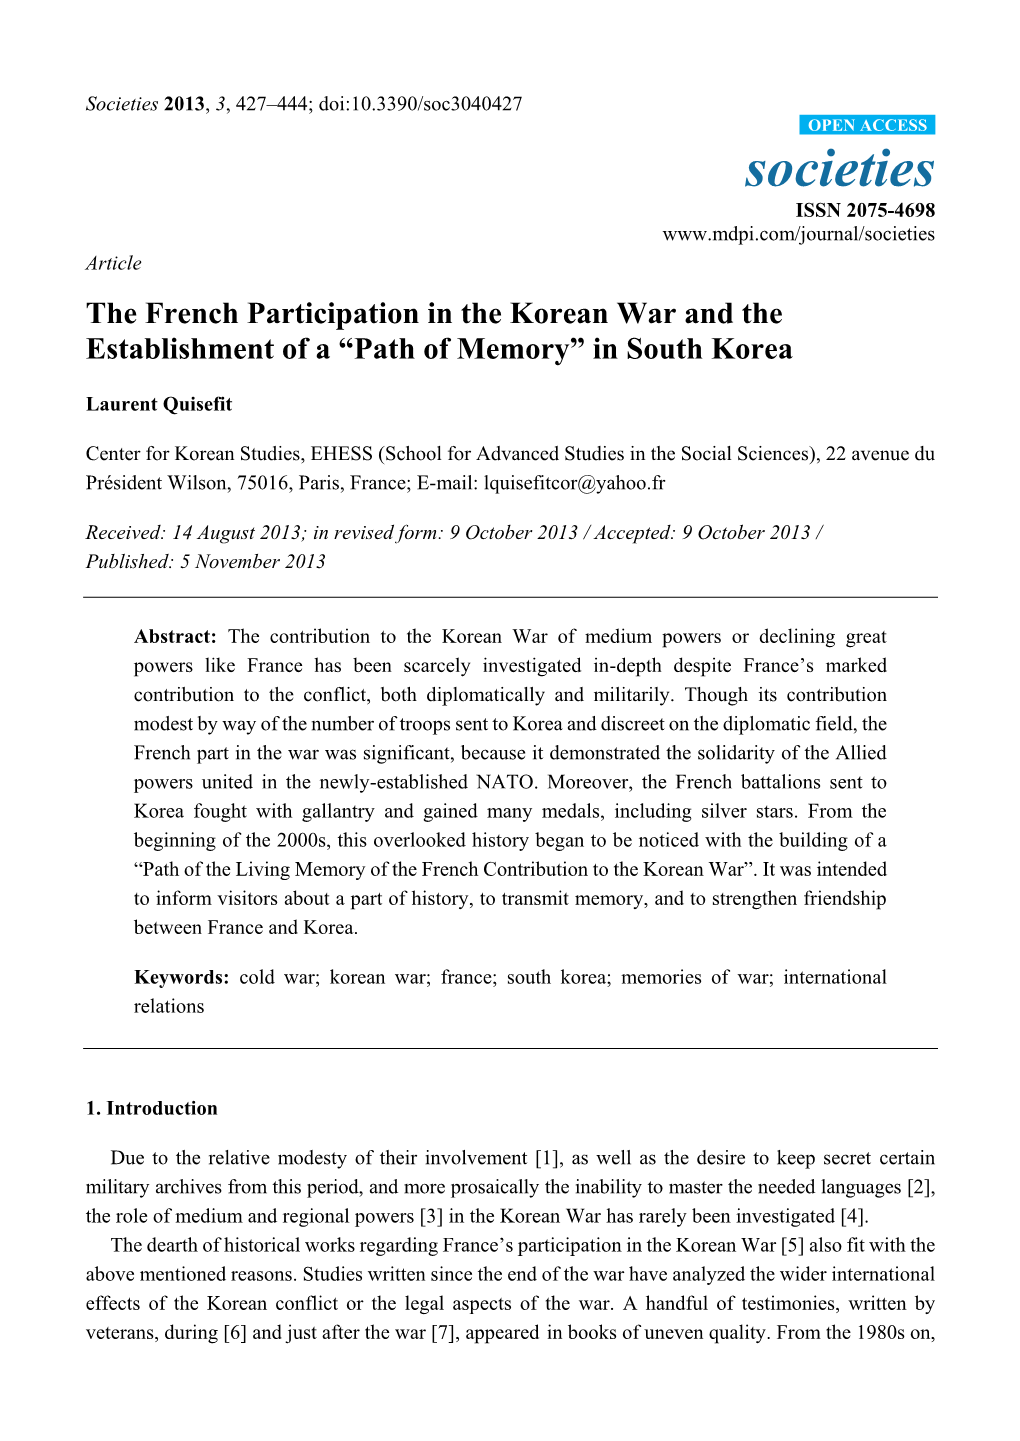 The French Participation in the Korean War and the Establishment of a “Path of Memory” in South Korea